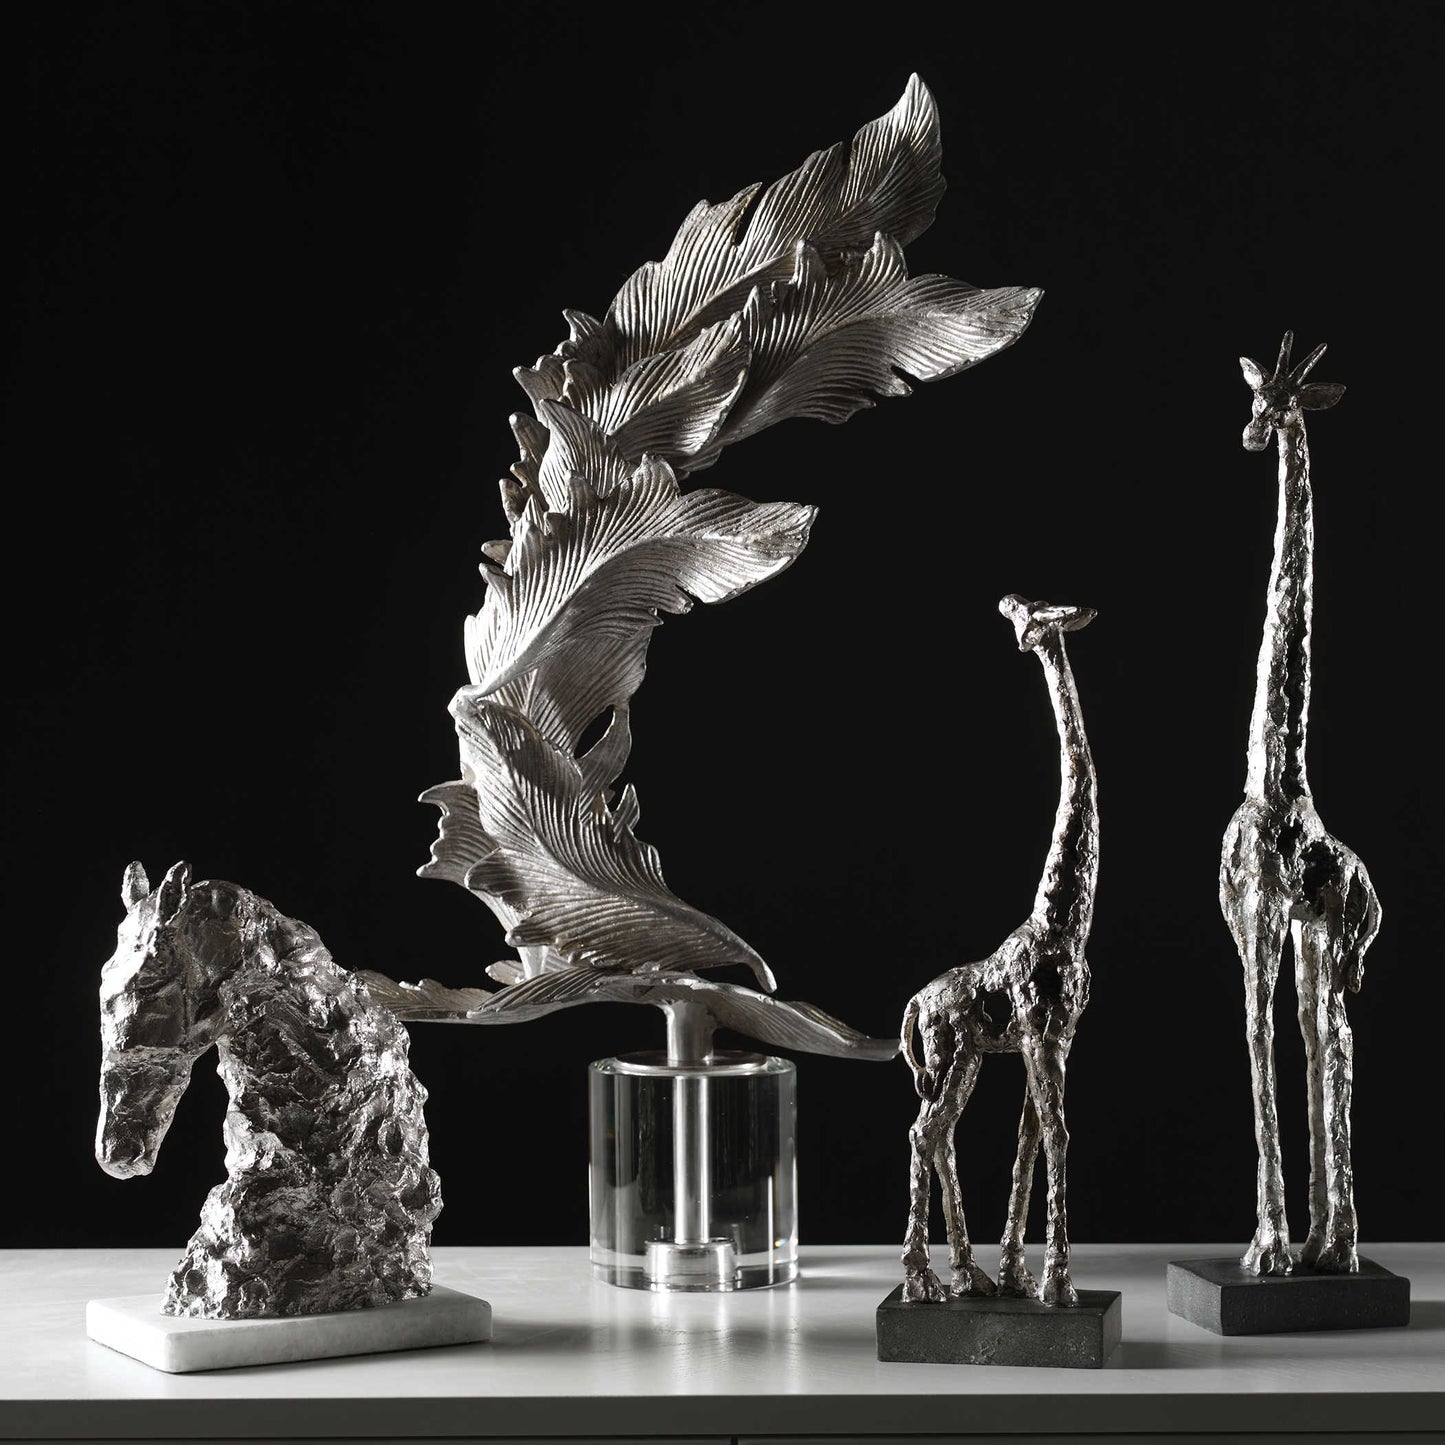 Giraffes posed with other sculptures.